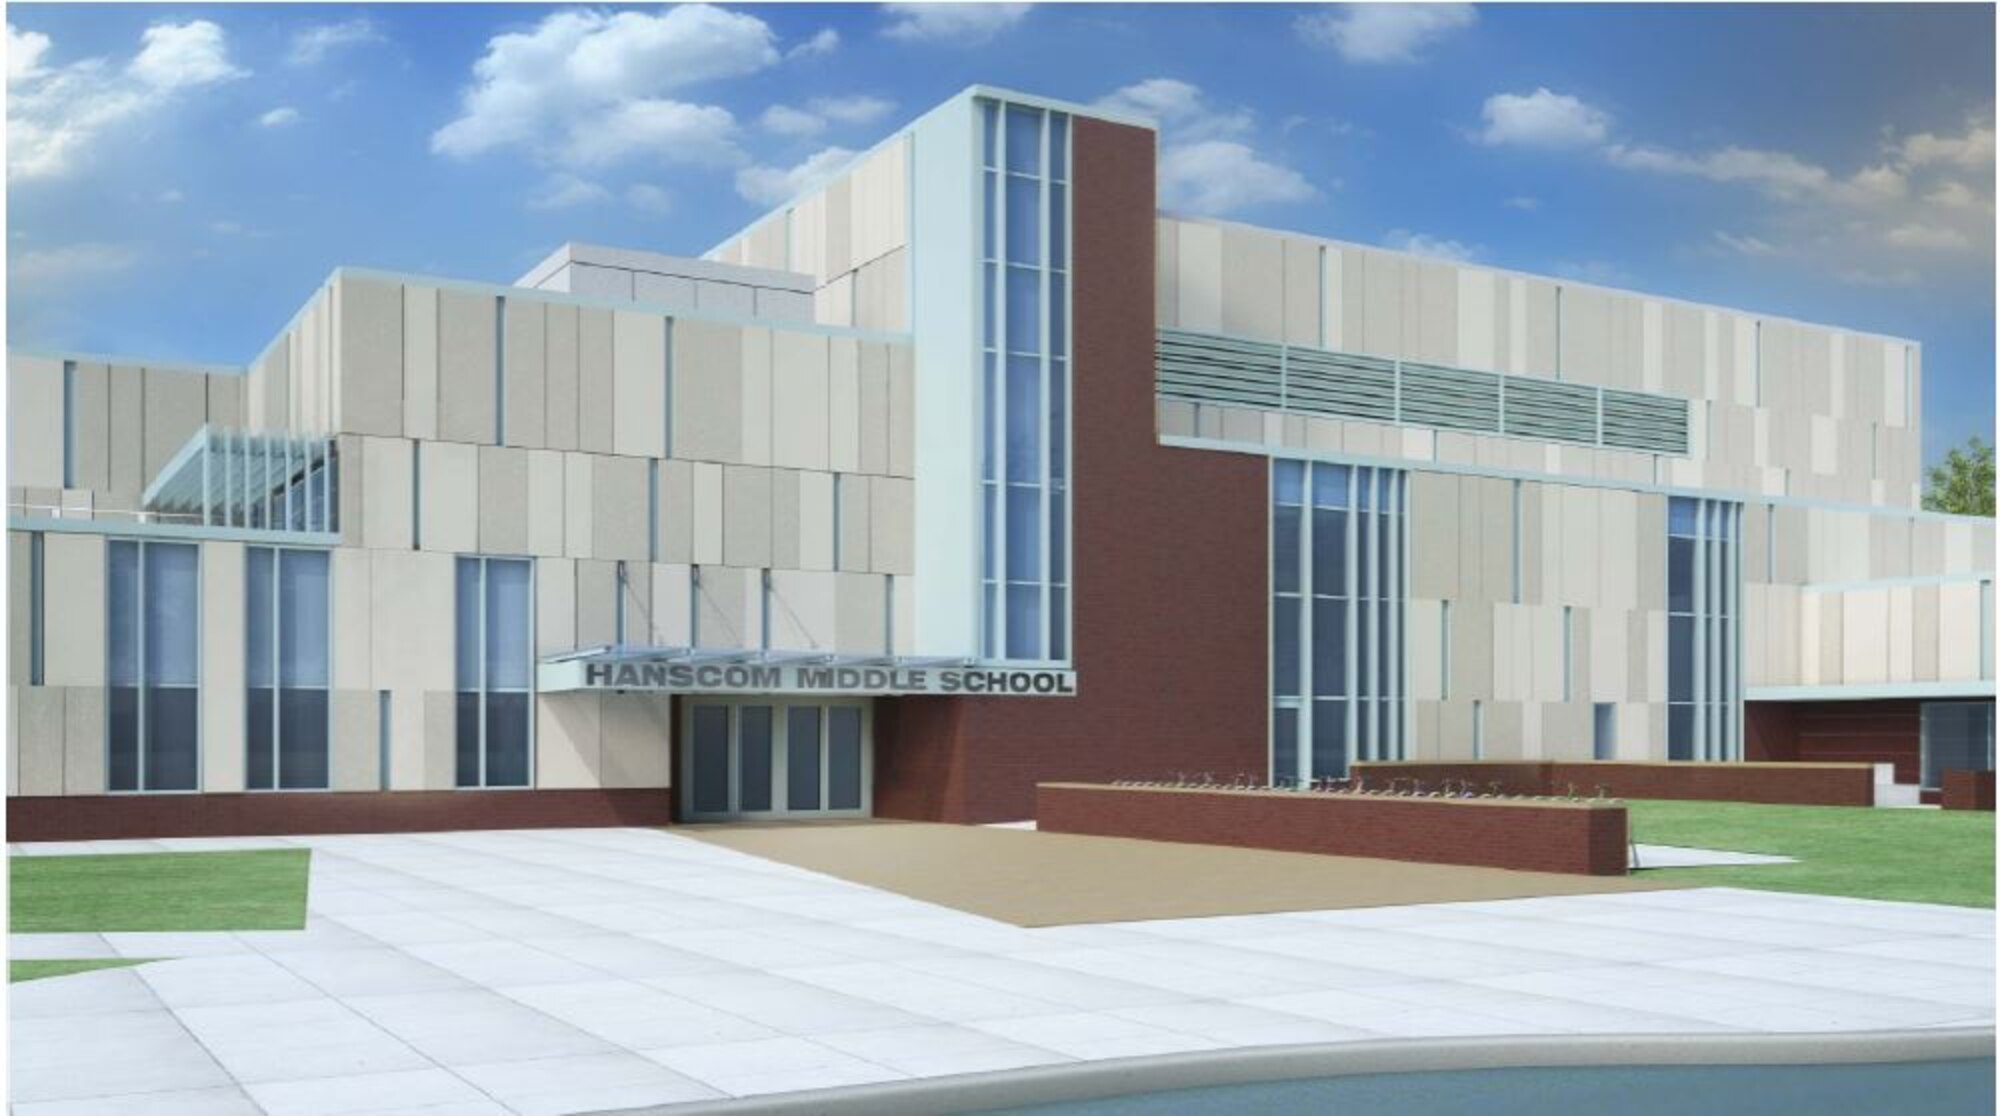 Architectural rendering of new Hanscom Middle School.